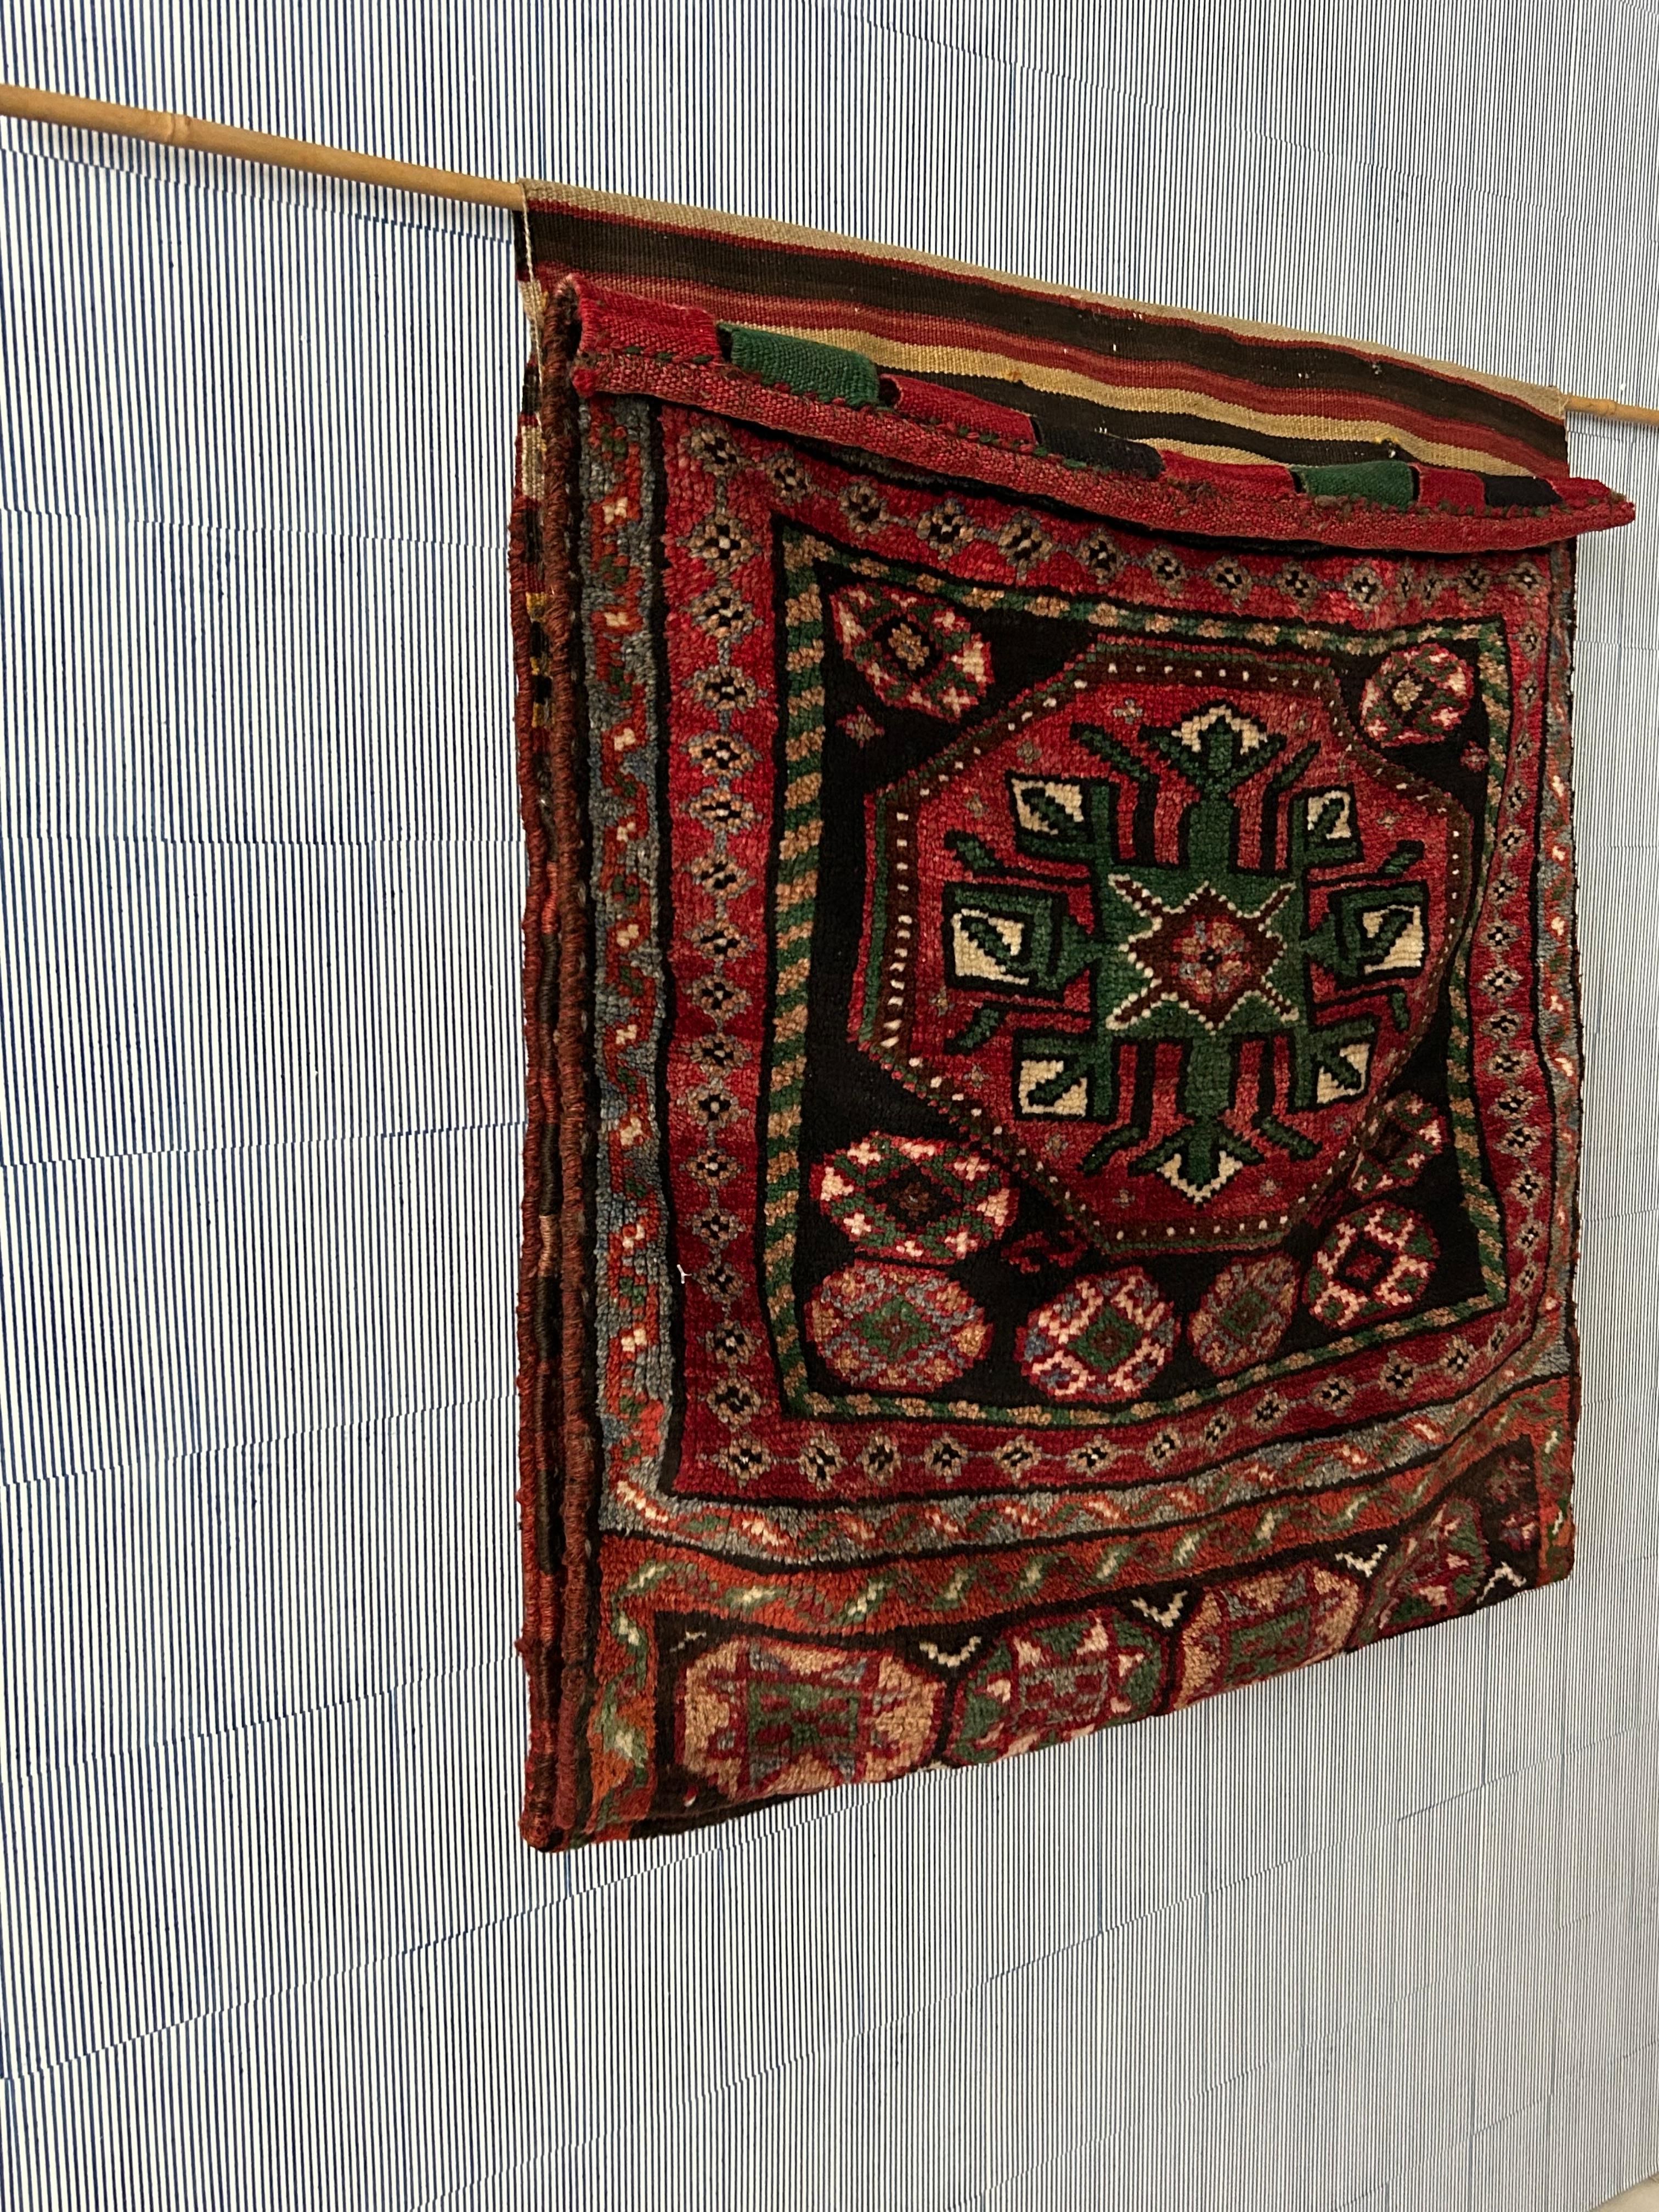 Hand-Crafted Vintage Decorative Red Multicolored Khorjin Saddle Bag, West Asia, 20th Century